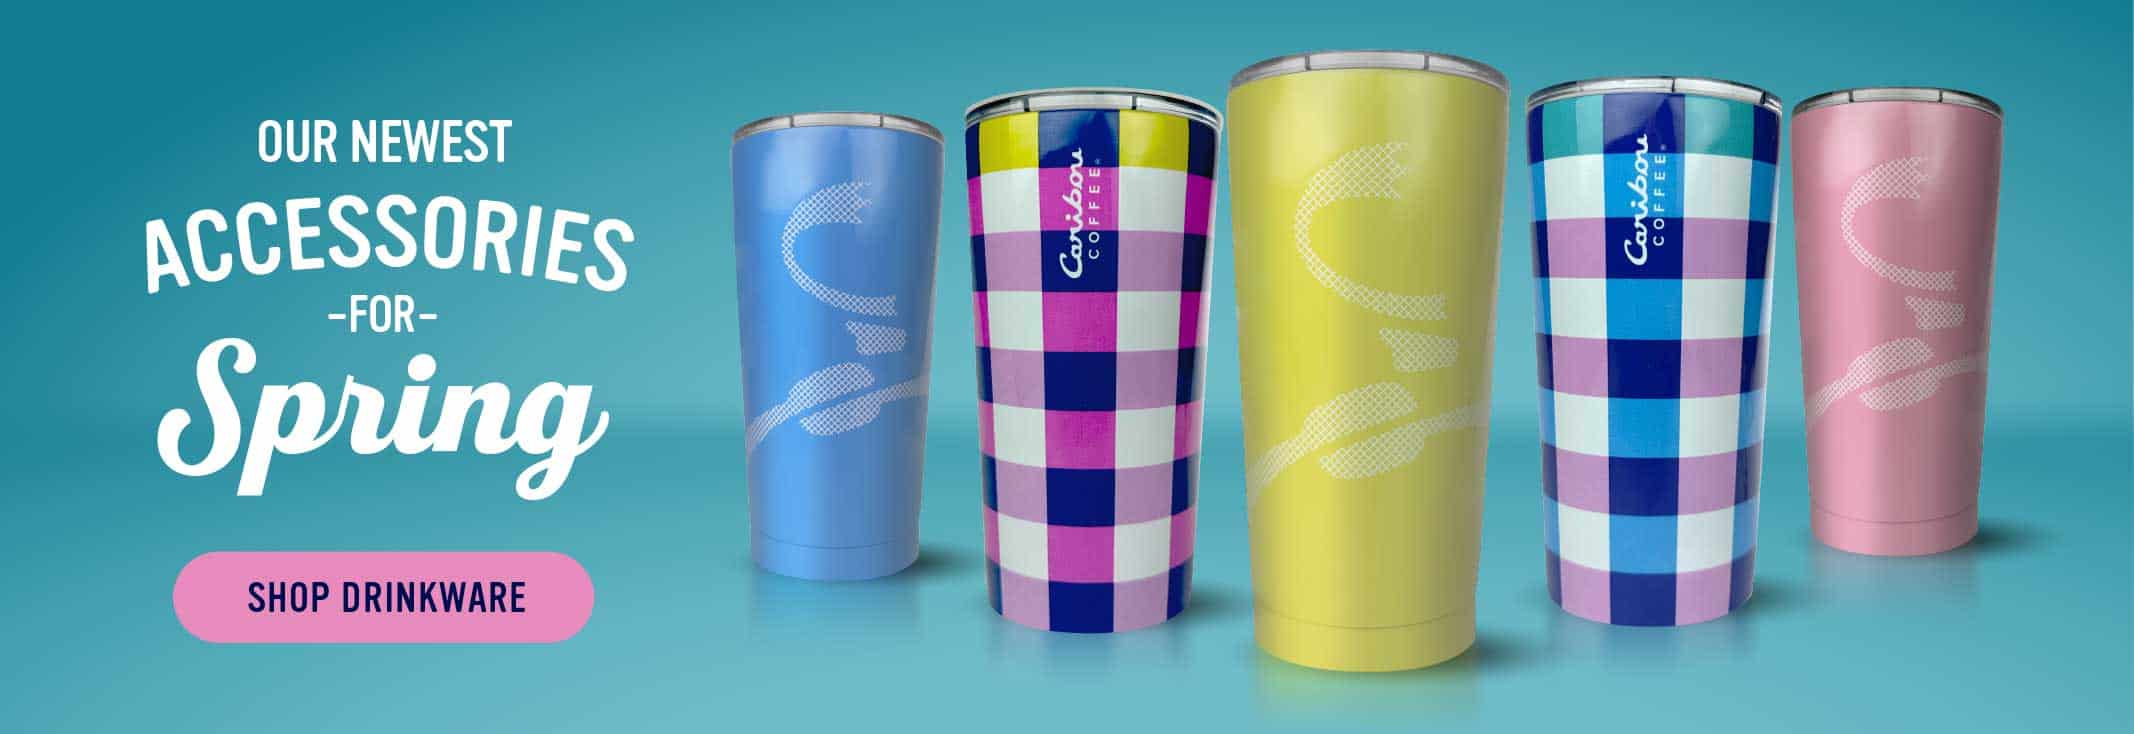 our newest accessories for spring. shop drinkware.